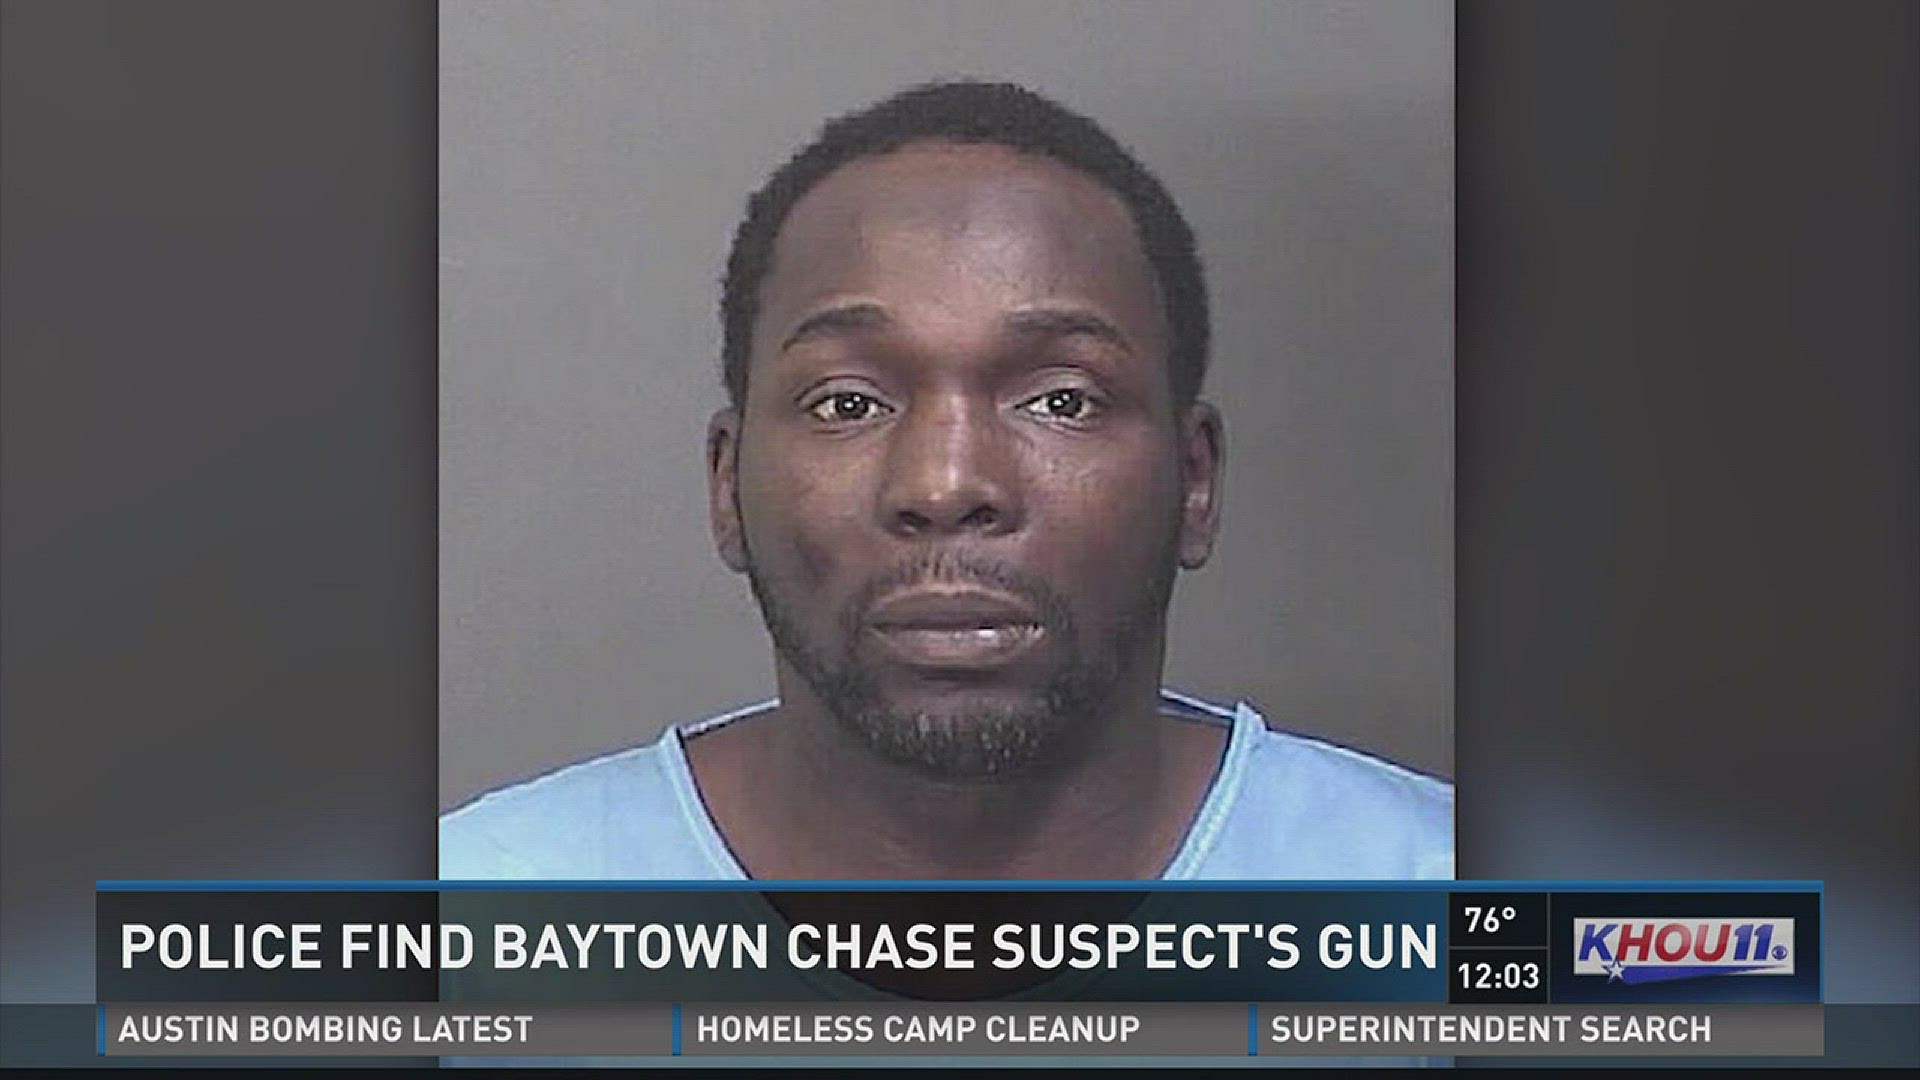 Police says they found the gun linked to a man who led authorities on a chase through Houston Thursday morning.